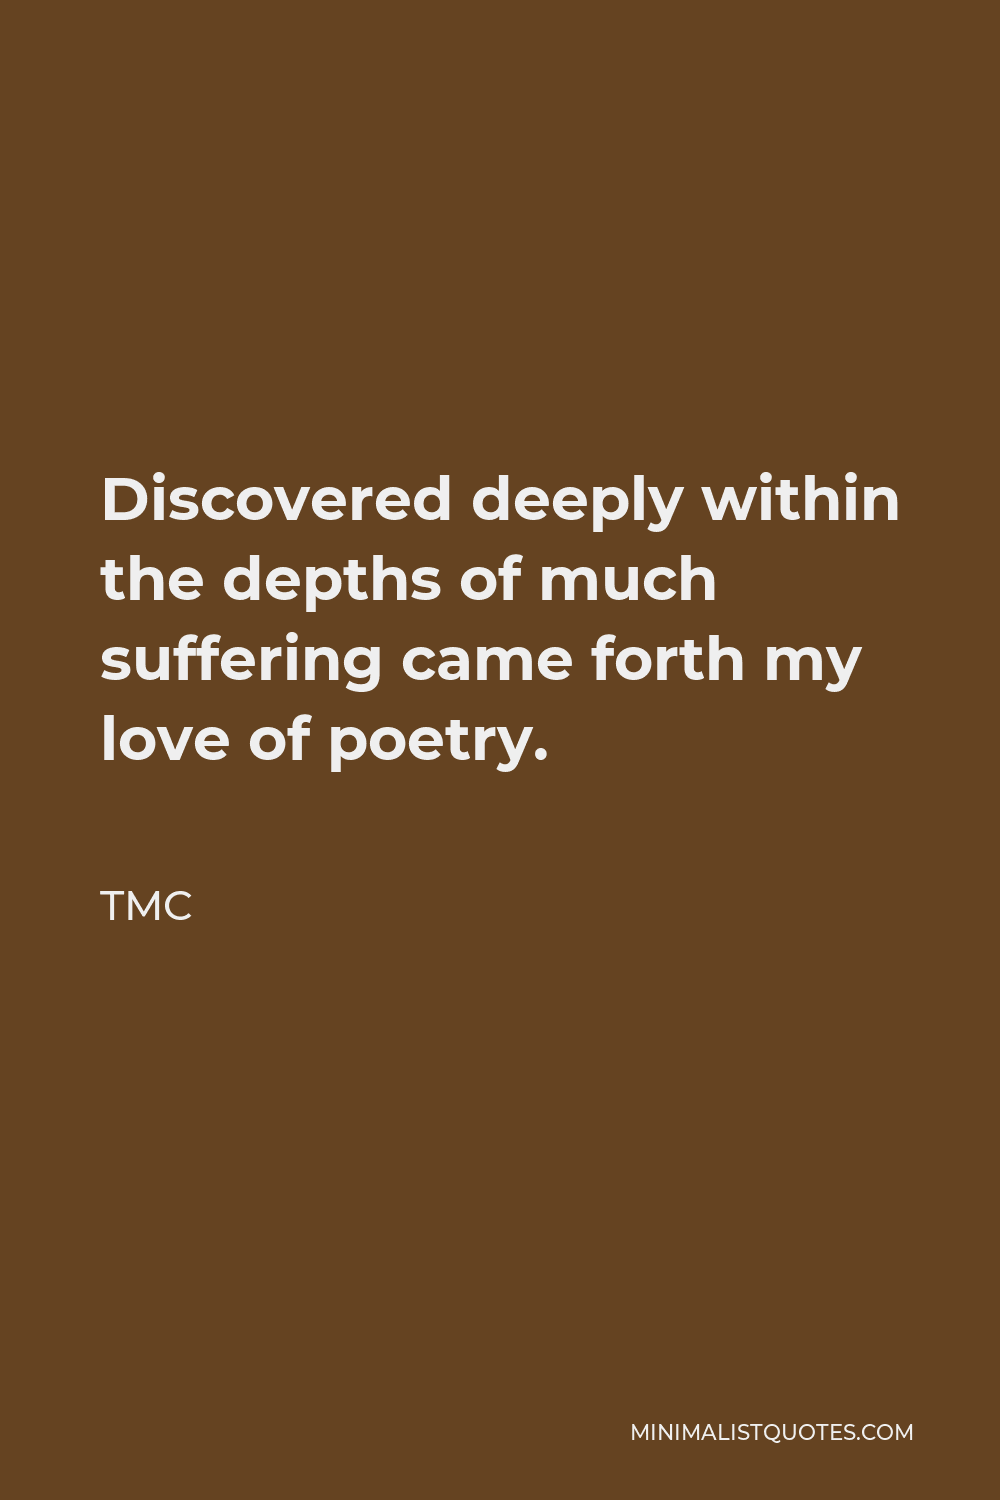 TMC Quote - Discovered deeply within the depths of much suffering came forth my love of poetry.